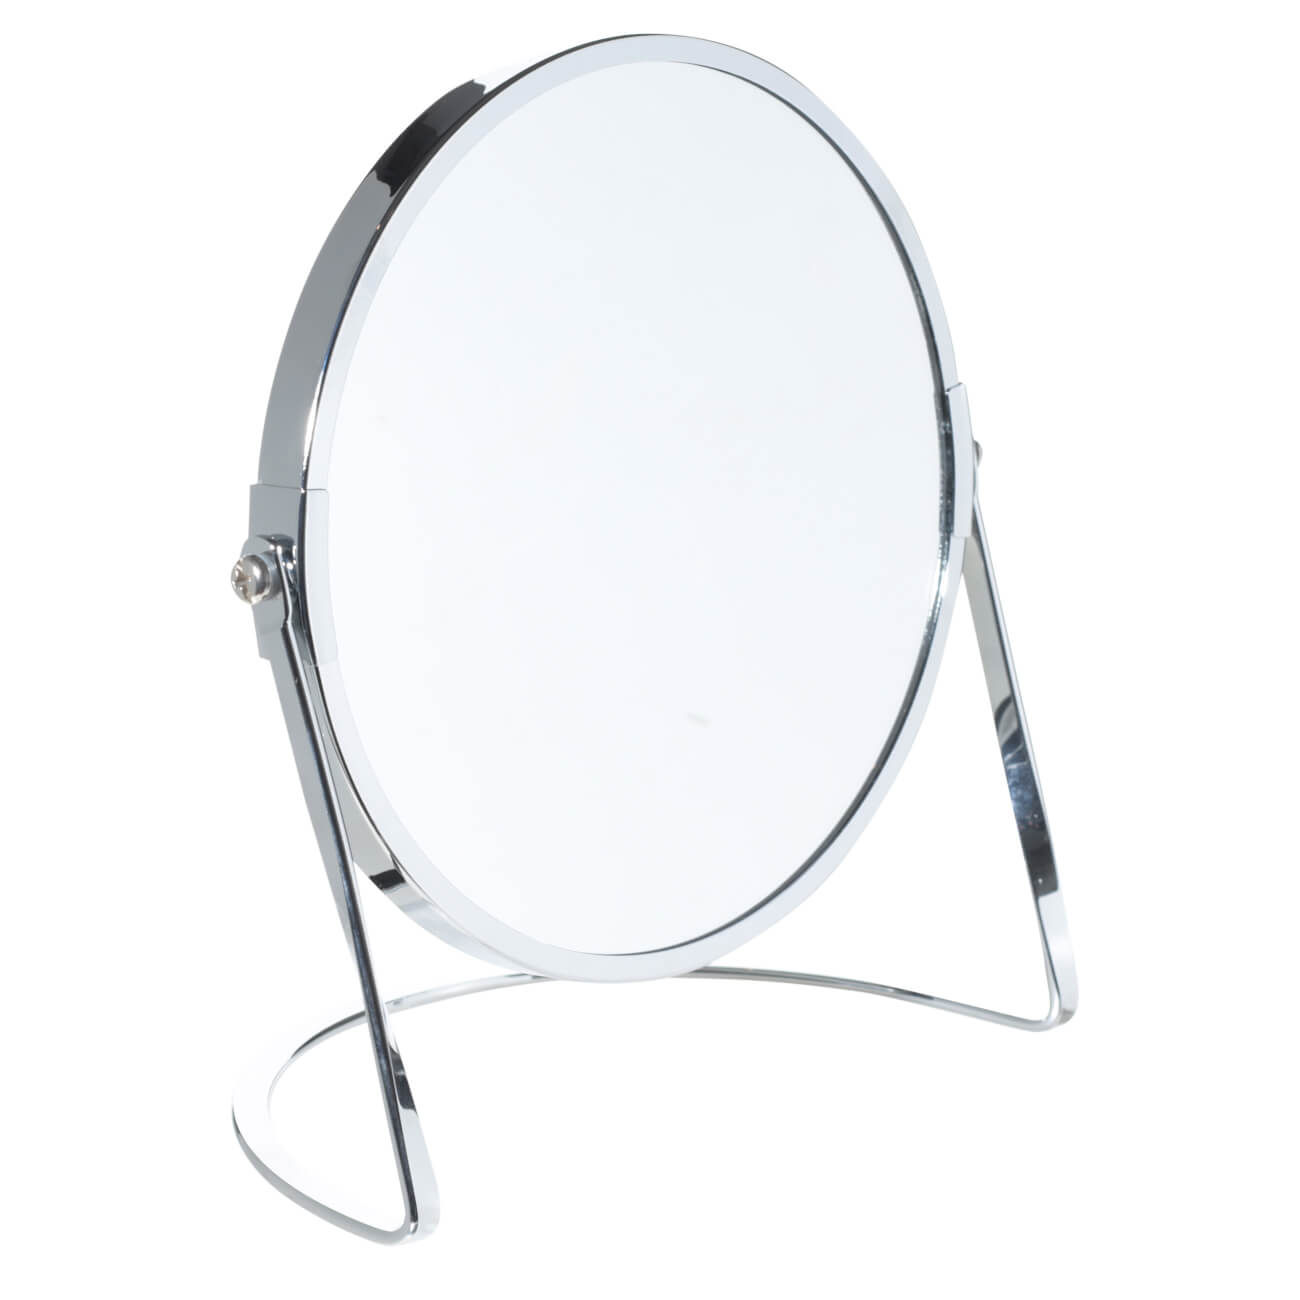 Table mirror, 20x17 cm, double-sided, metal, round, Fantastic изображение № 1